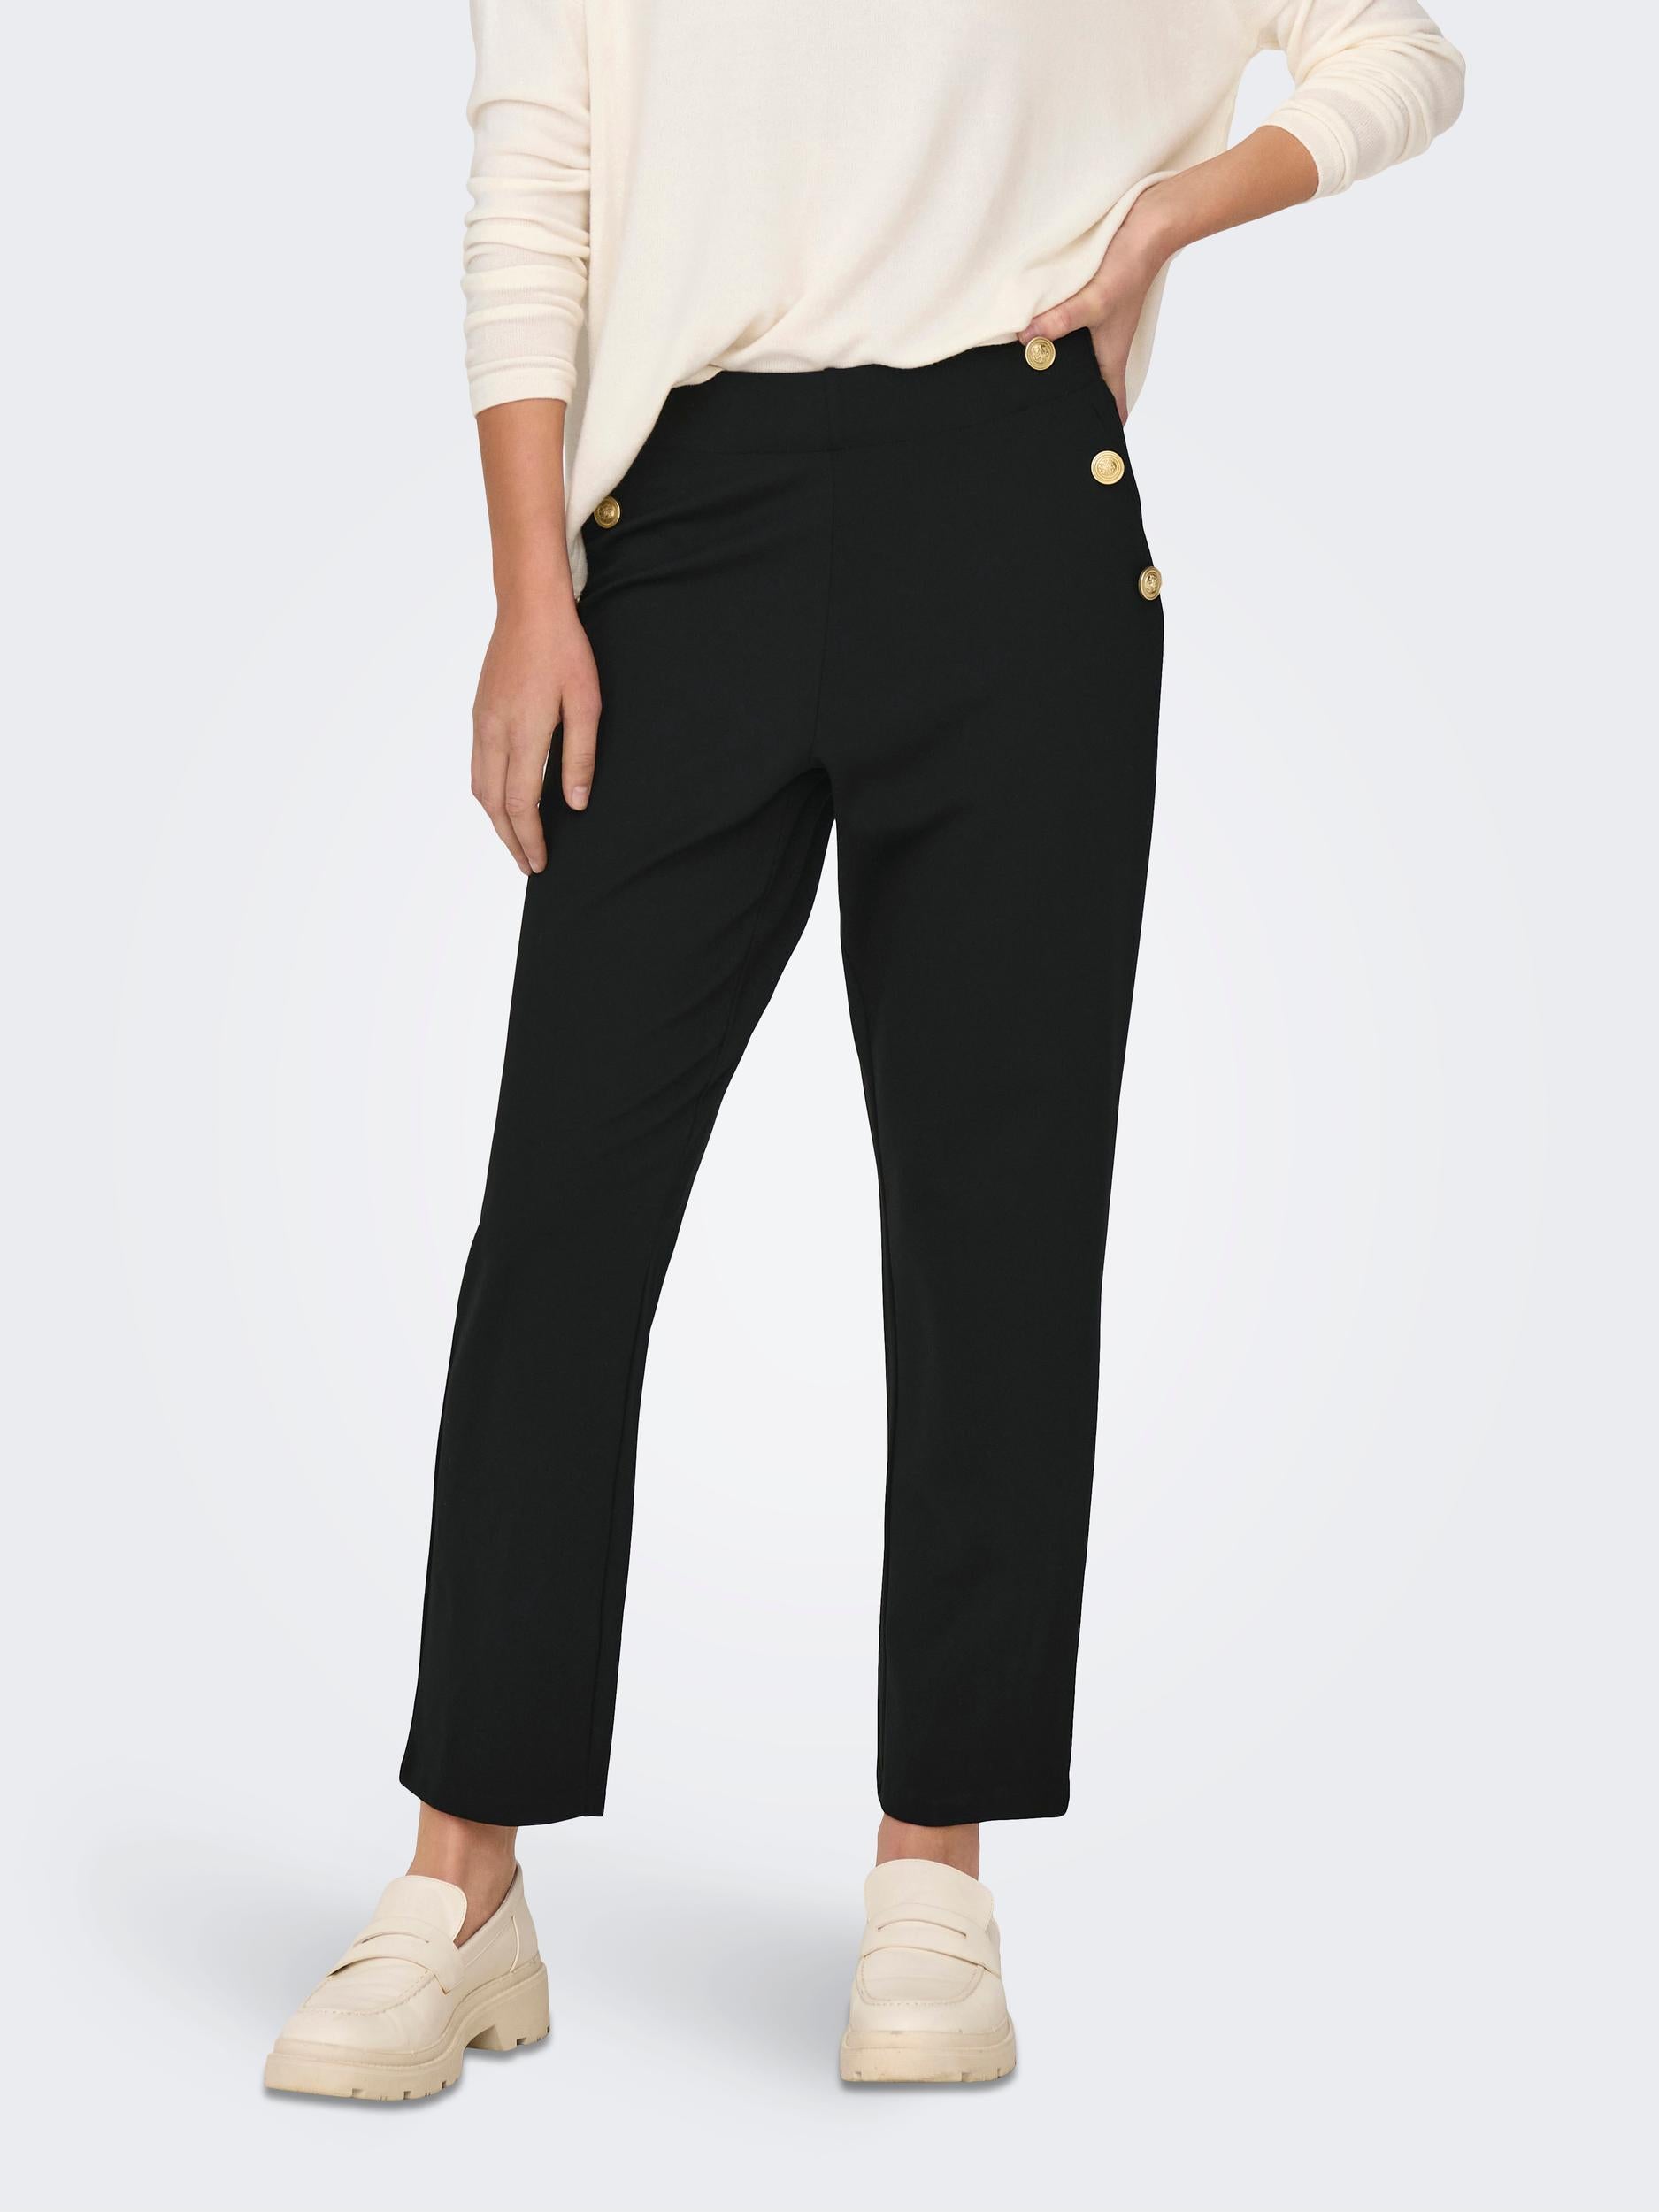 Ladies Cally Button Ancle Pant-Black-Model Front View